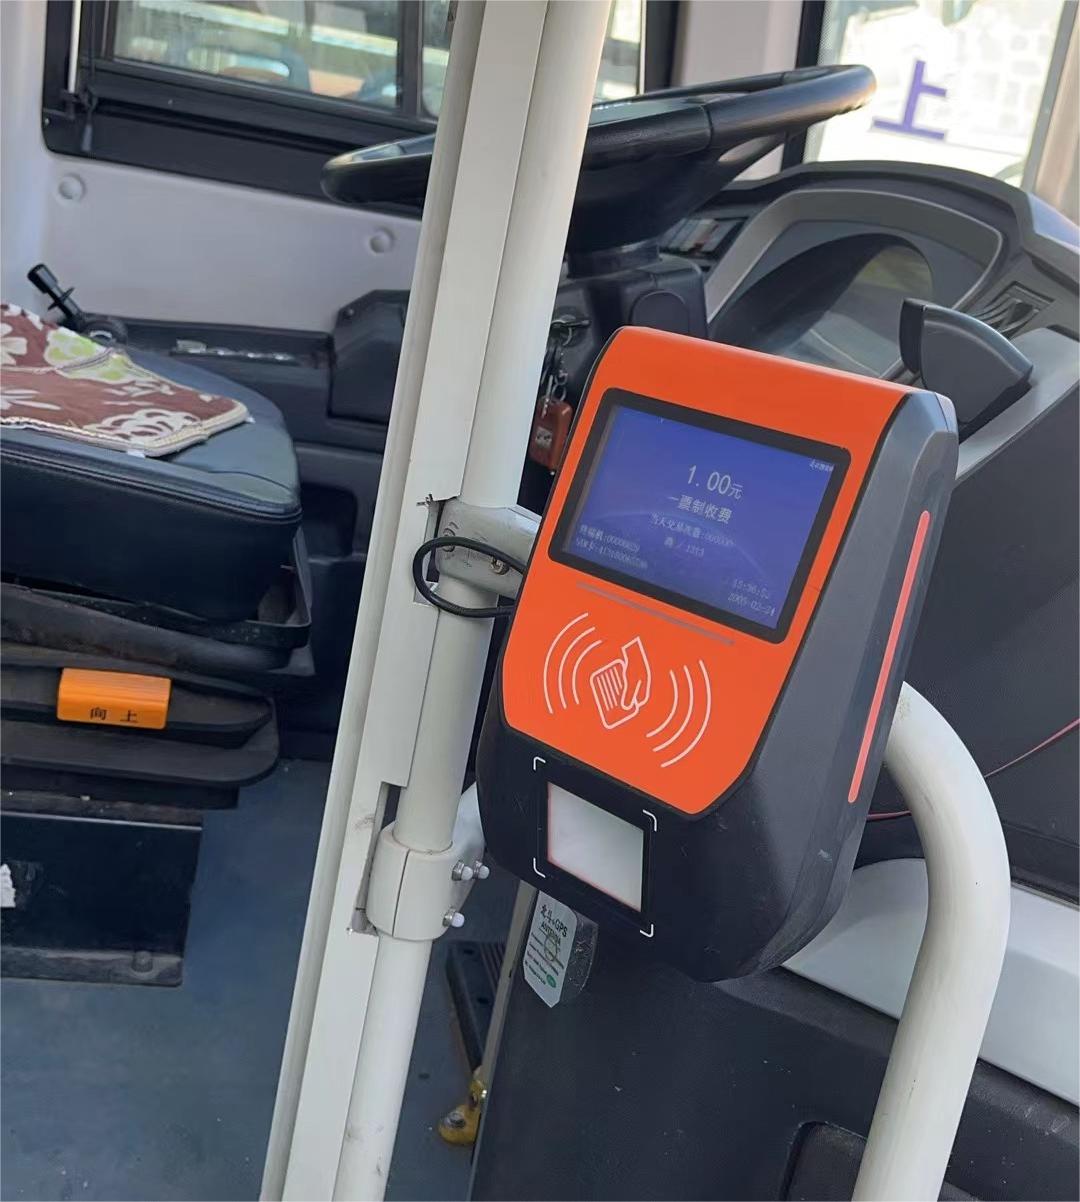 What is the function of the bus payment system?